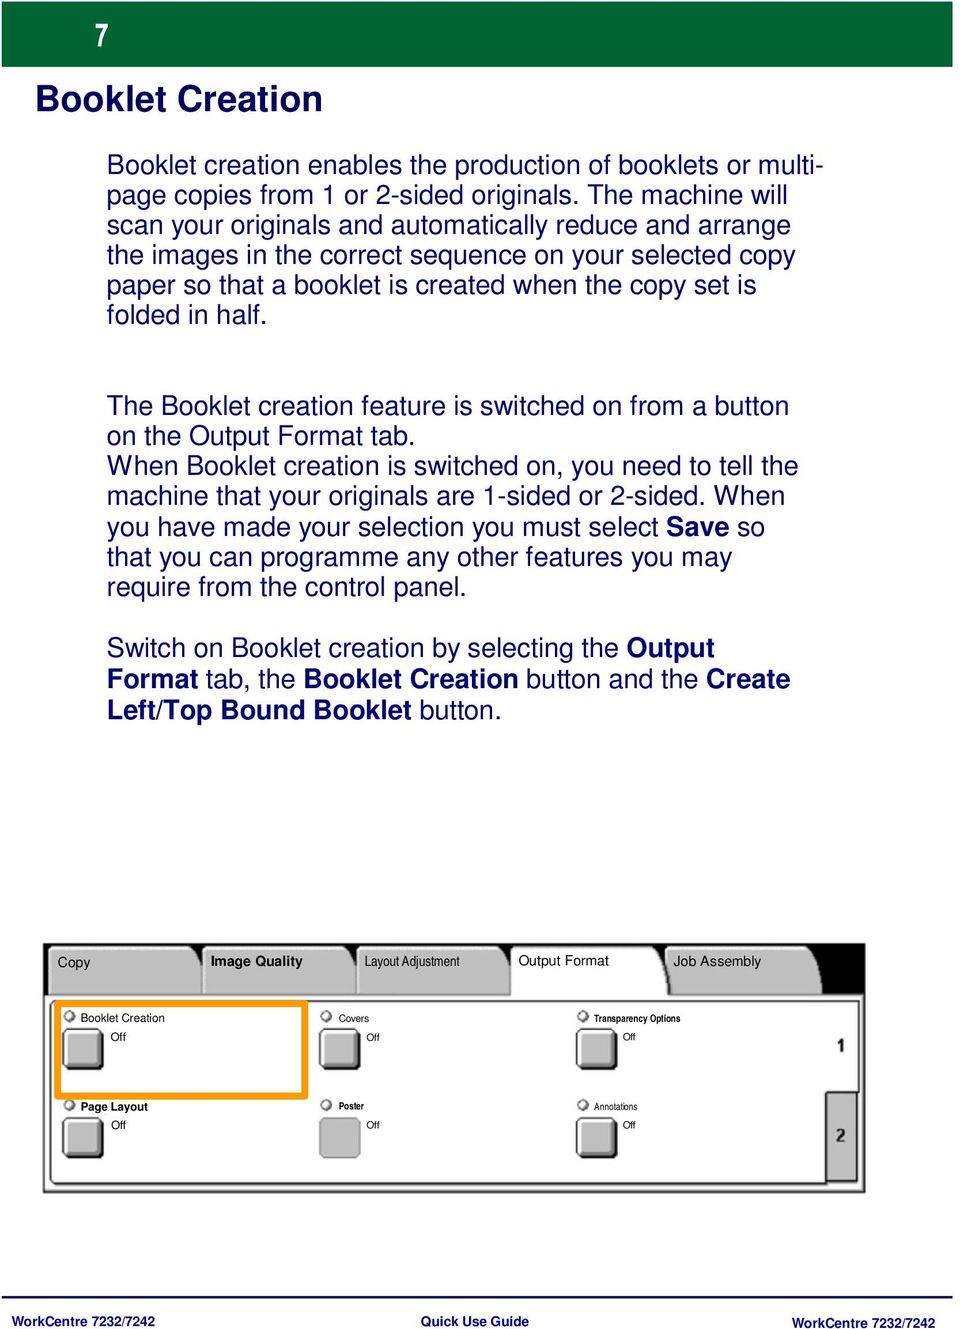 half. The Booklet creation feature is switched on from a button on the Output Format tab. When Booklet creation is switched on, you need to tell the machine that your originals are 1-sided or 2-sided.